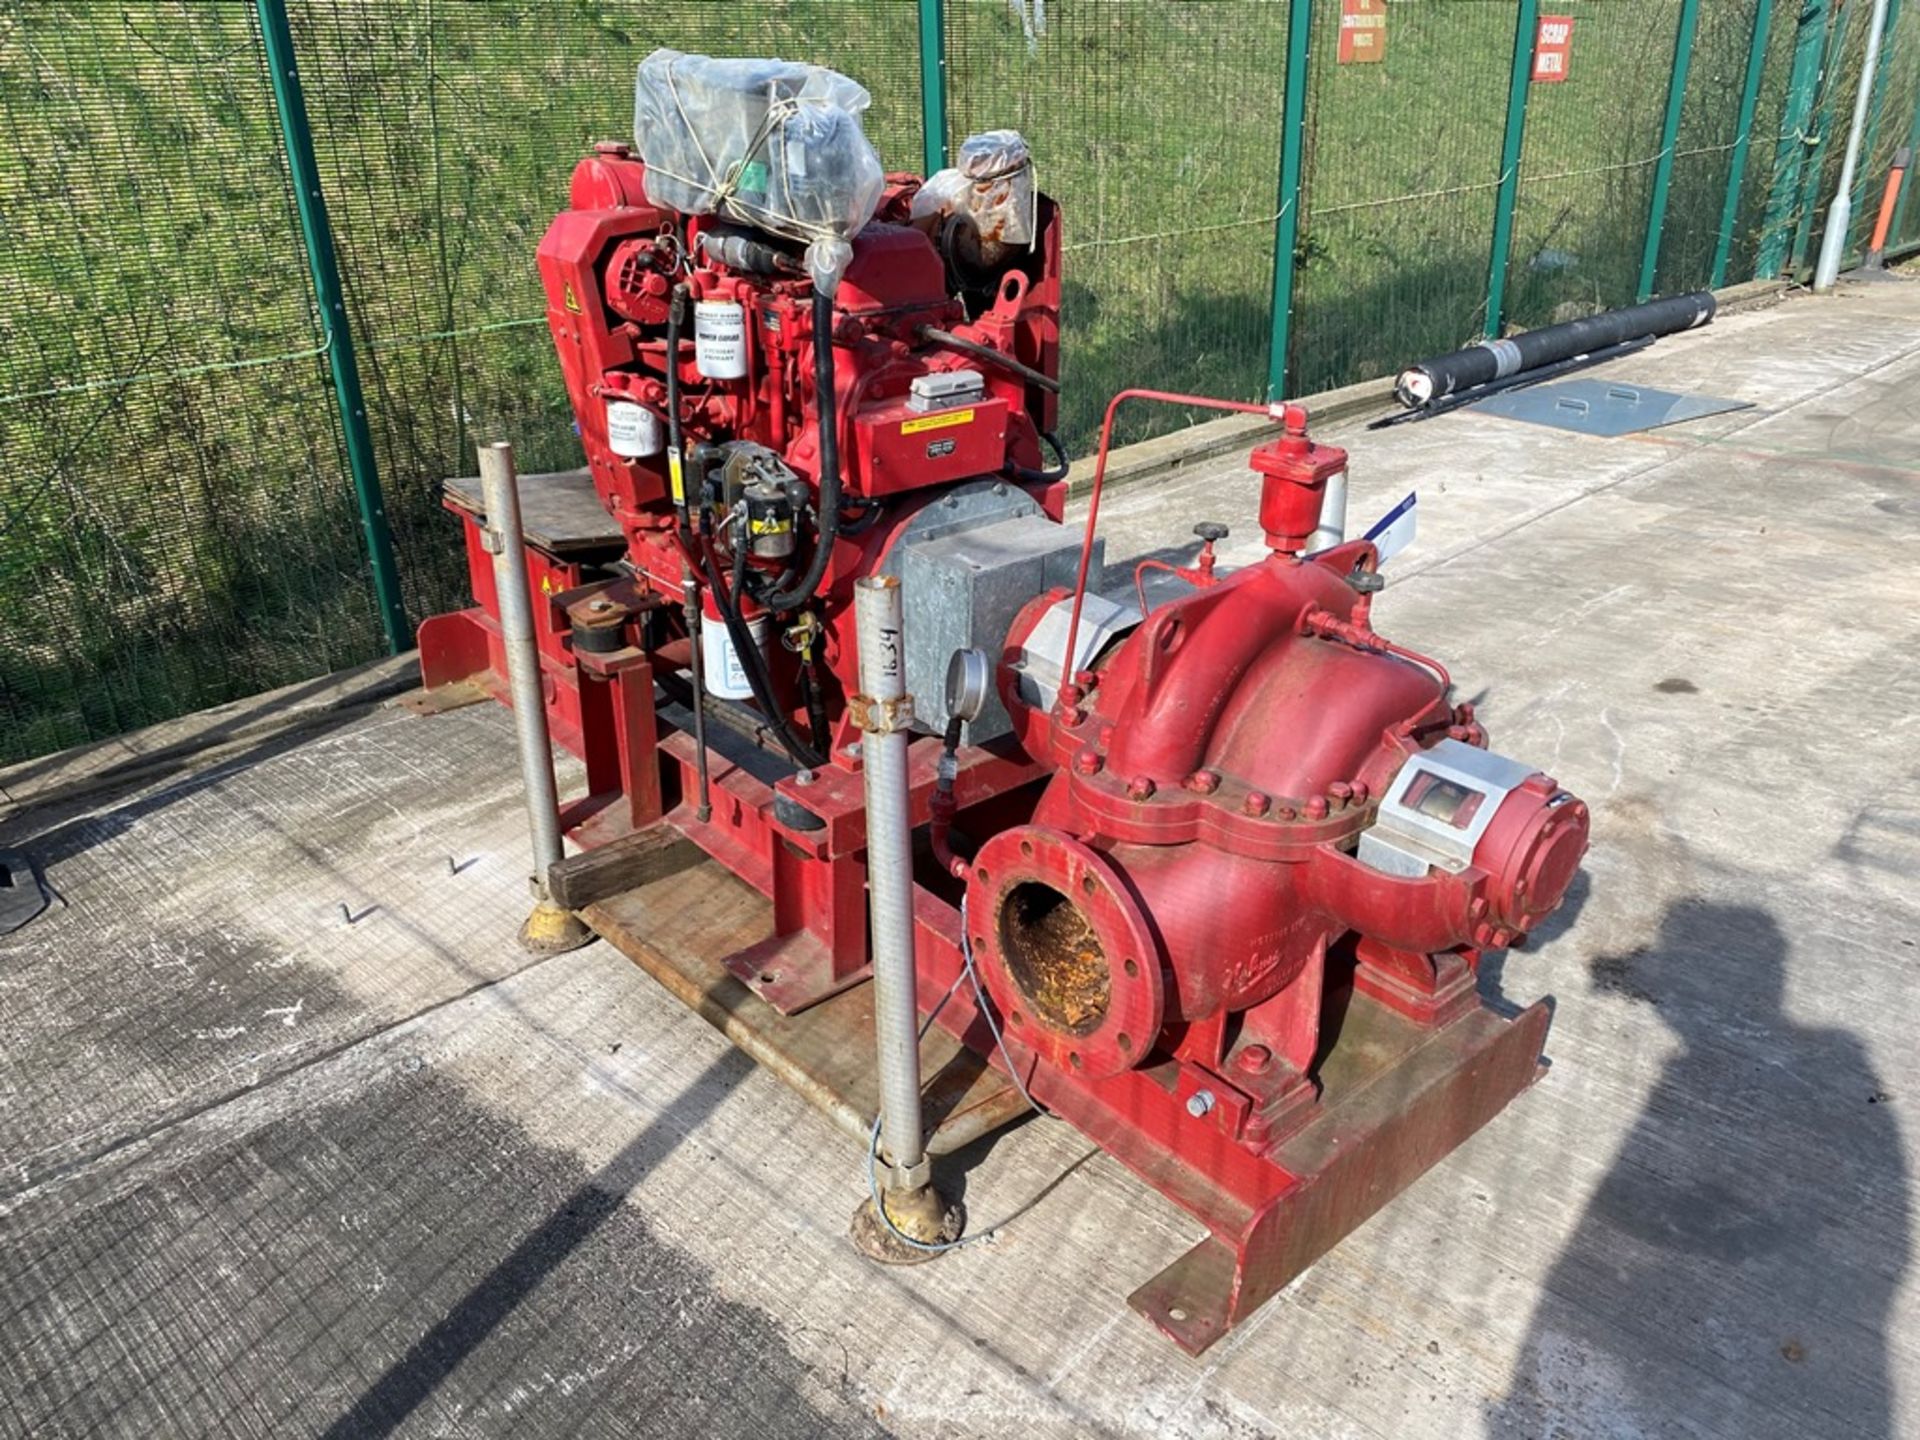 Strong Pumps Ltd HGTI-150 Centrifugal Pump, serial no. S523242B, with fitted Clarke Detroit DDFP- - Image 2 of 11